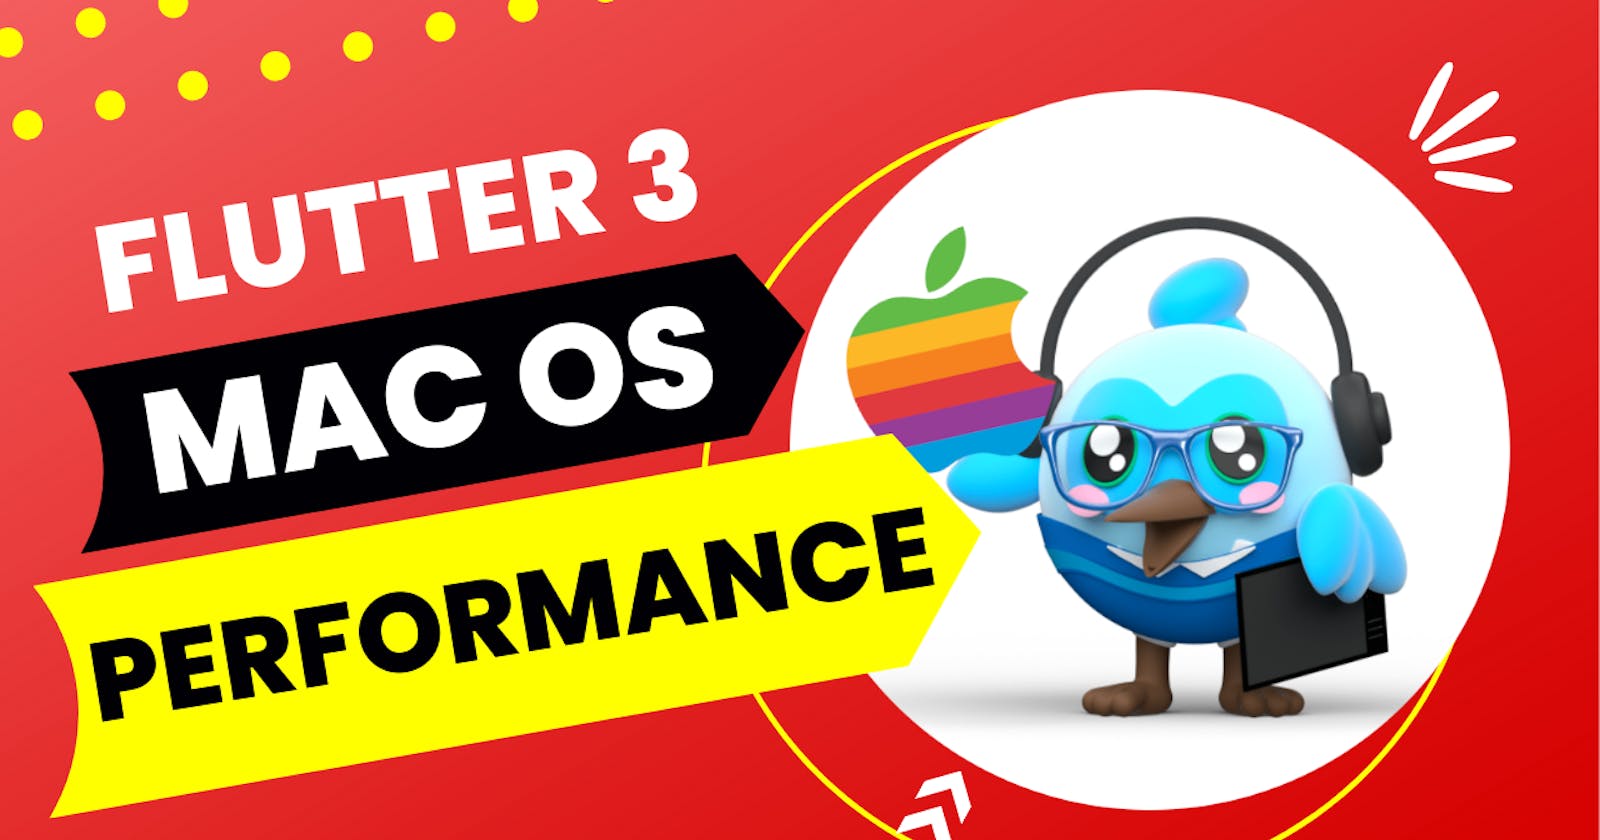 Amazing performance improvements in Flutter 3 for Mac apps